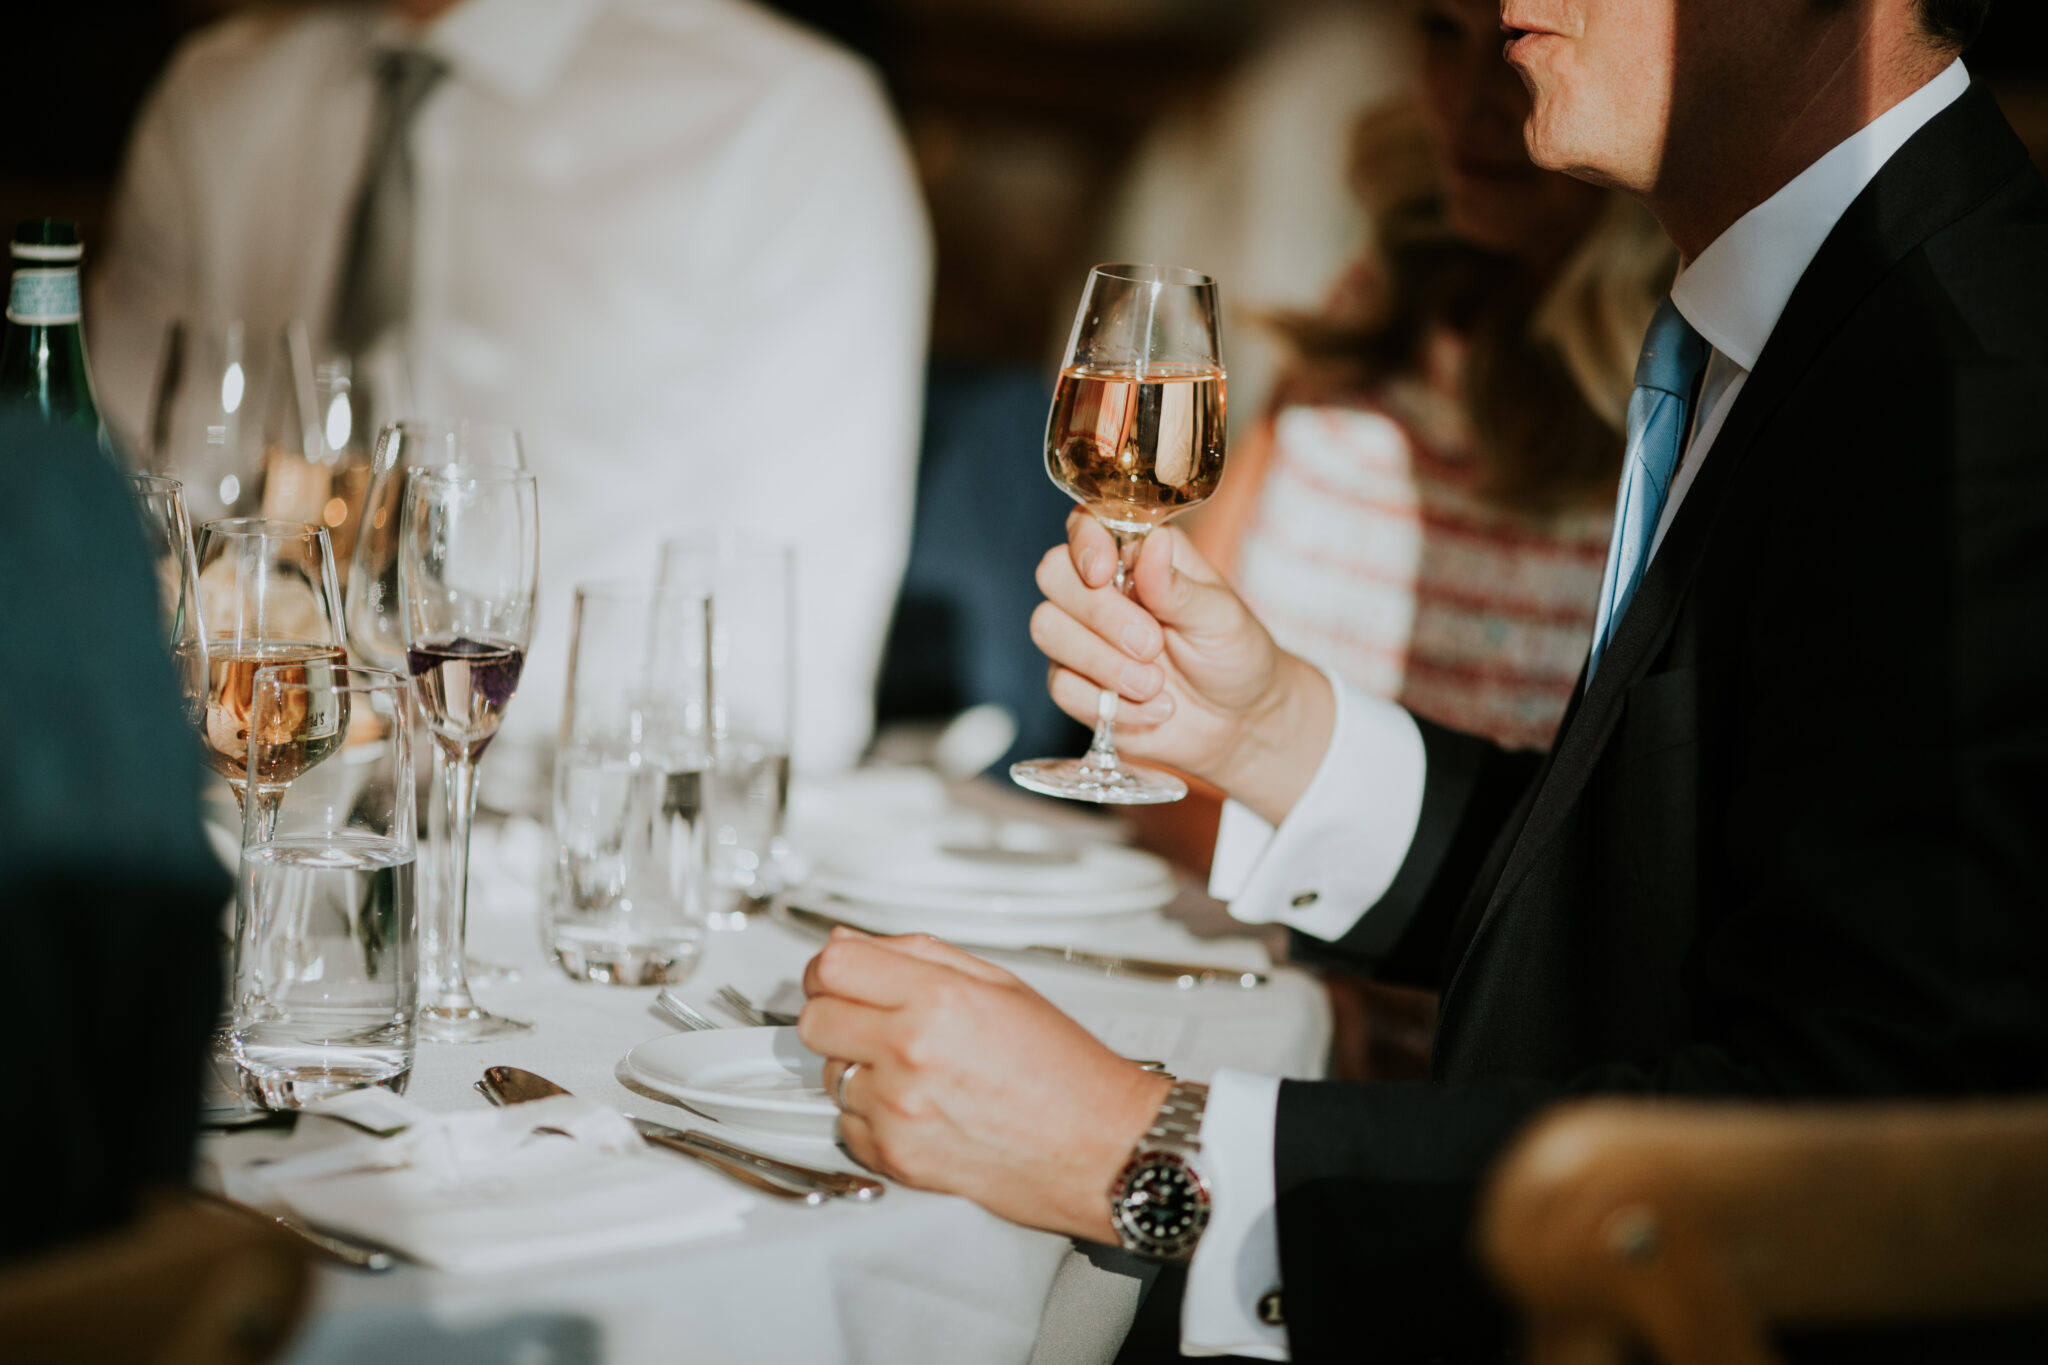 Guest drinking wine at a corporate event dinner